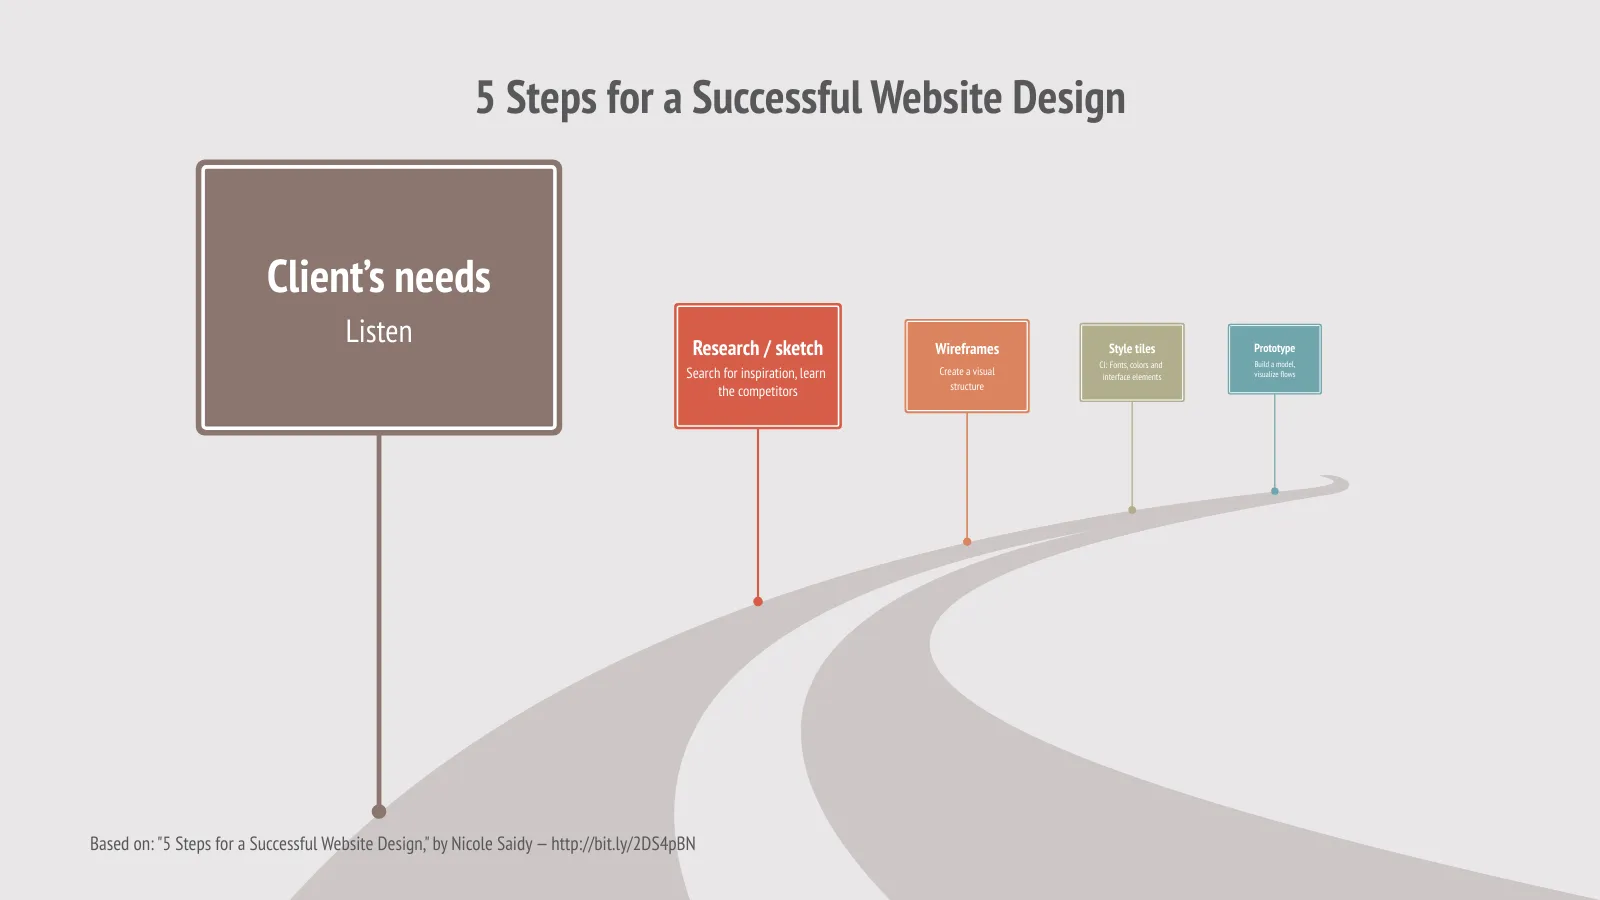 Roadmap example: 5 Steps for a Successful Website Design